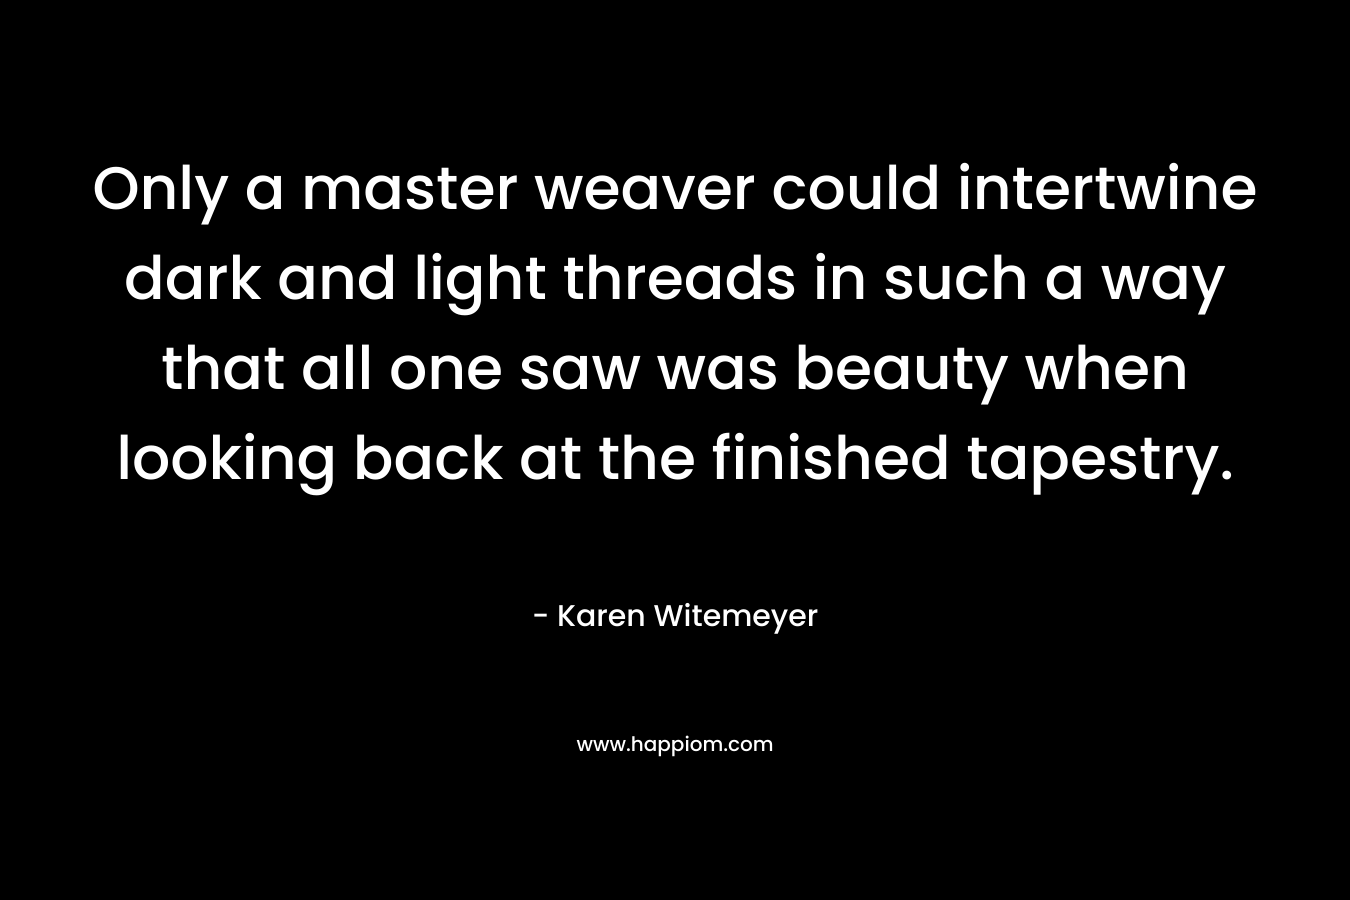 Only a master weaver could intertwine dark and light threads in such a way that all one saw was beauty when looking back at the finished tapestry.